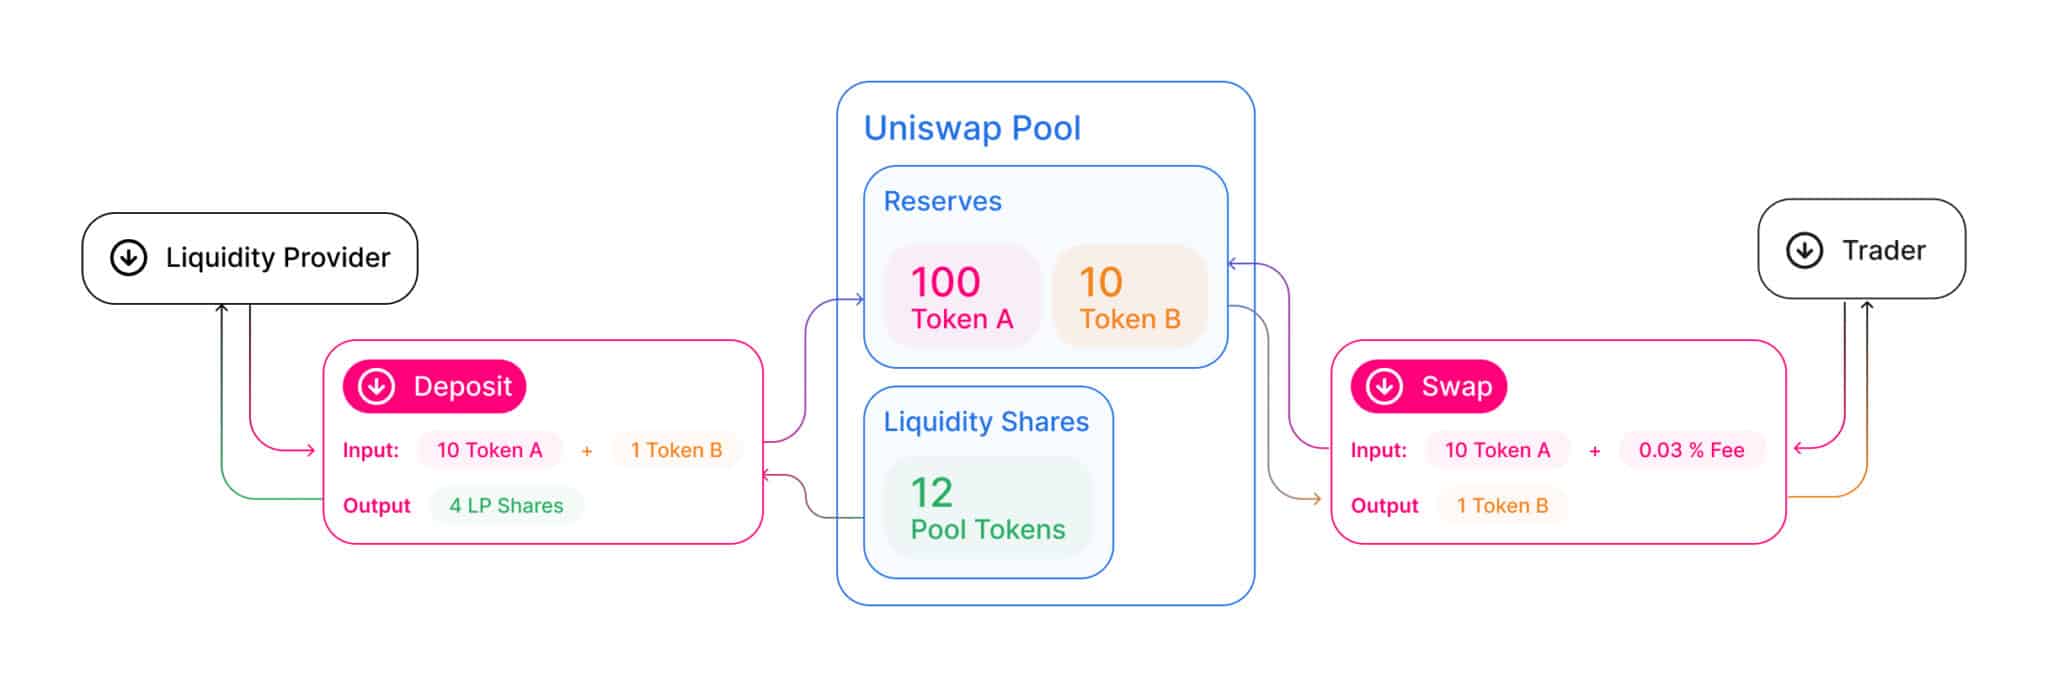 The anatomy of a Uniswap pool. If you don't get this image, don't worry– you don't need to understand it to keep going :)